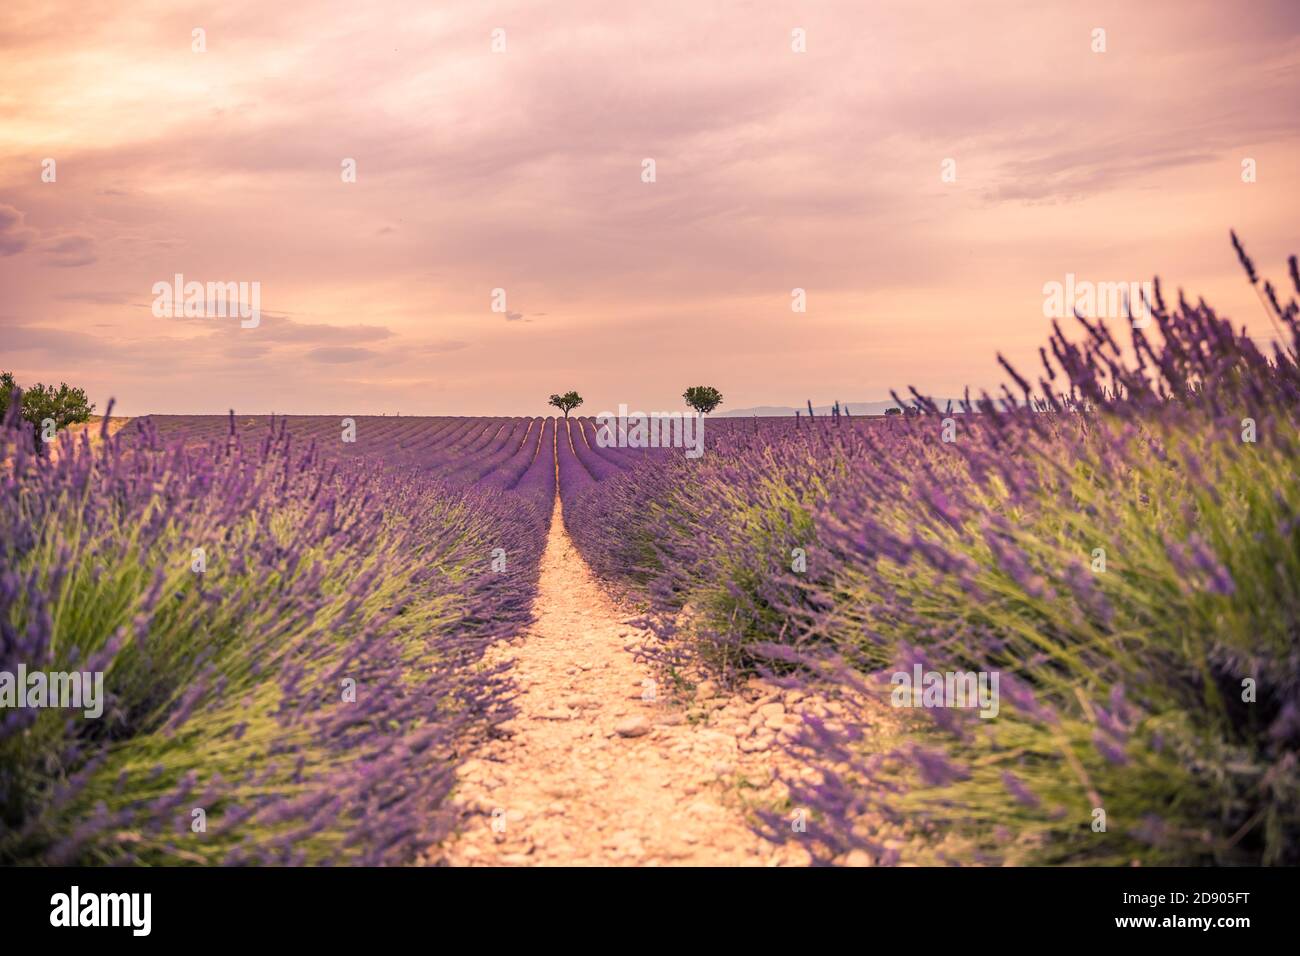 Wonderful nature landscape, amazing sunset scenery with blooming lavender flowers. Moody sky, pastel colors on bright landscape view. Floral panoramic Stock Photo